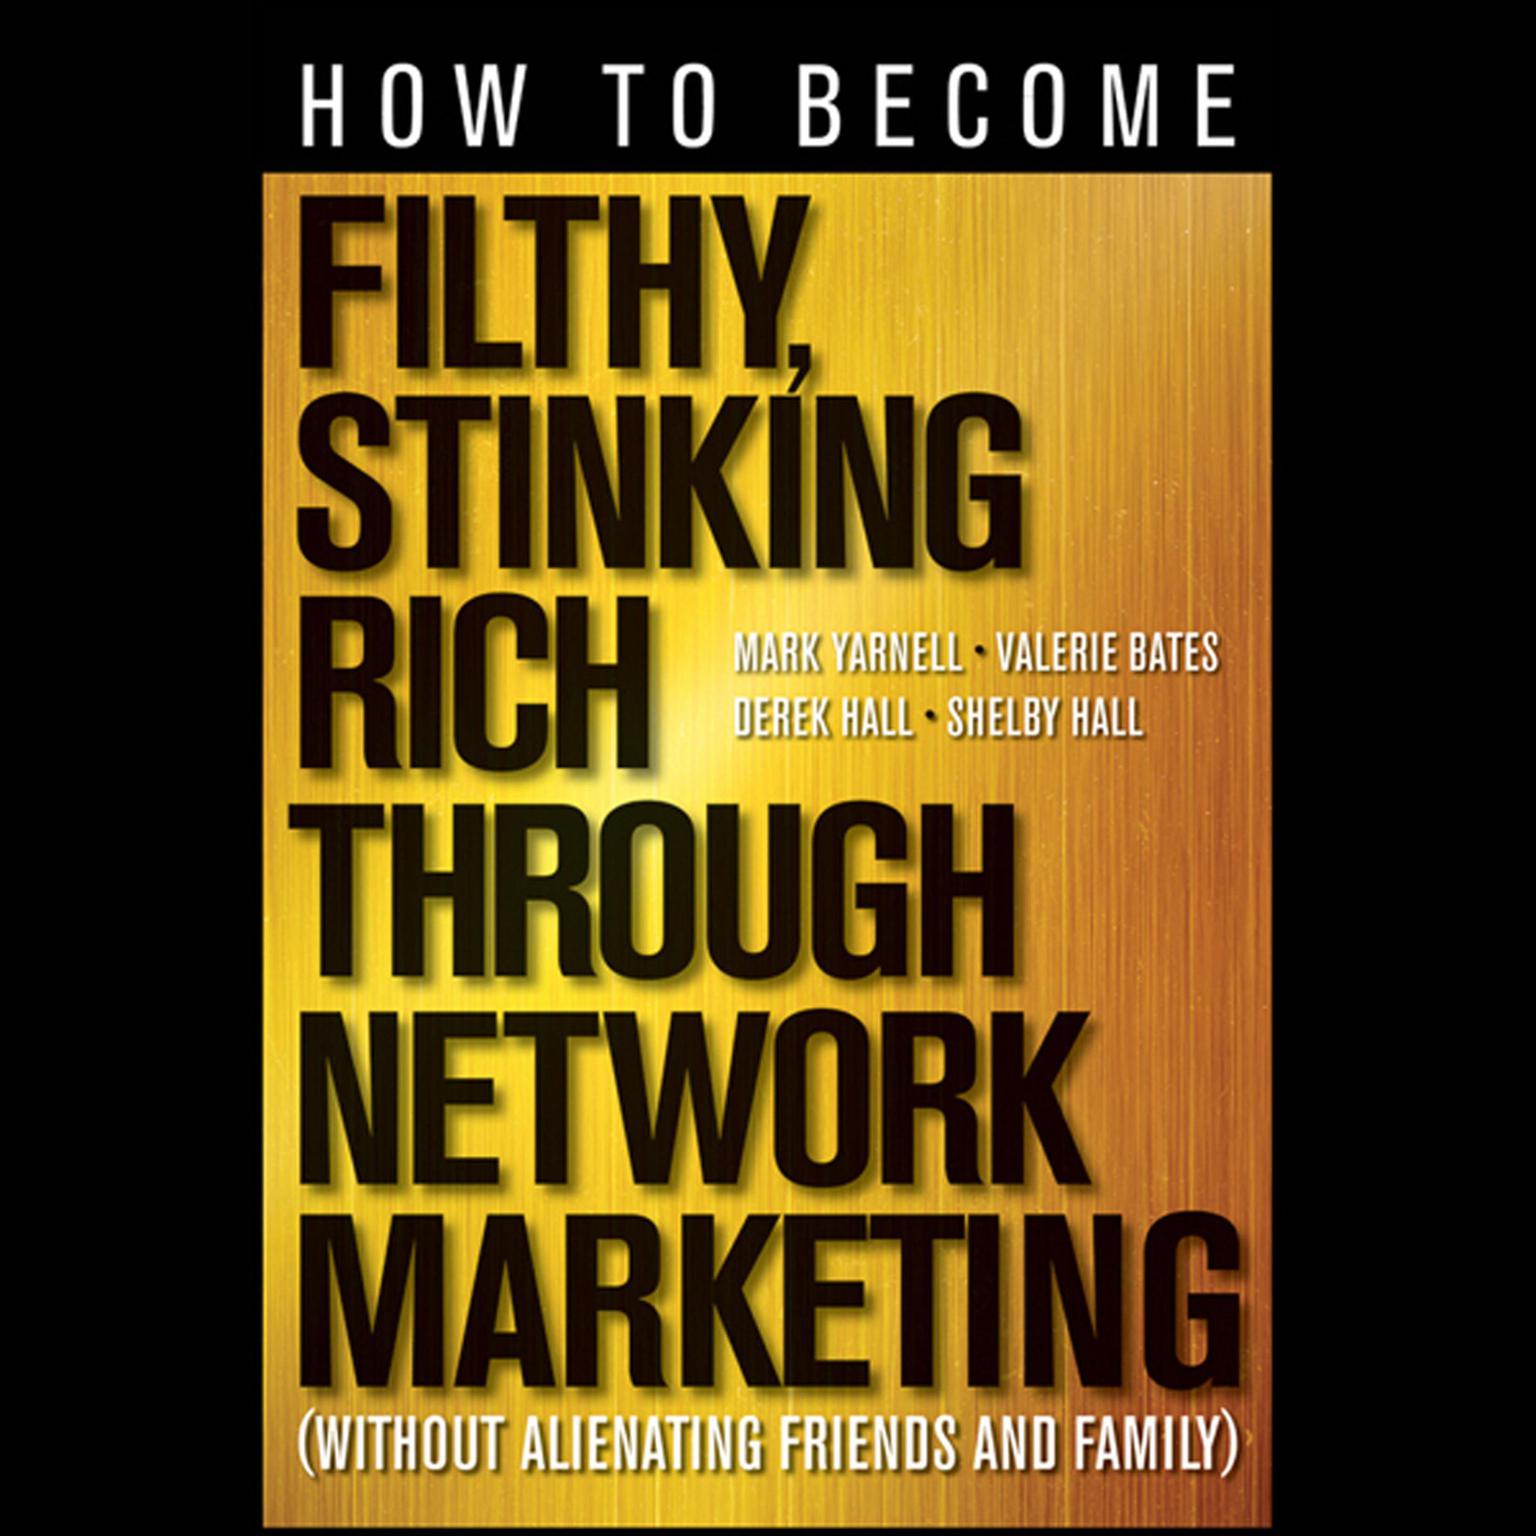 How to Become Filthy, Stinking Rich Through Network Marketing: Without Alienating Friends and Family Audiobook, by Mark Yarnell